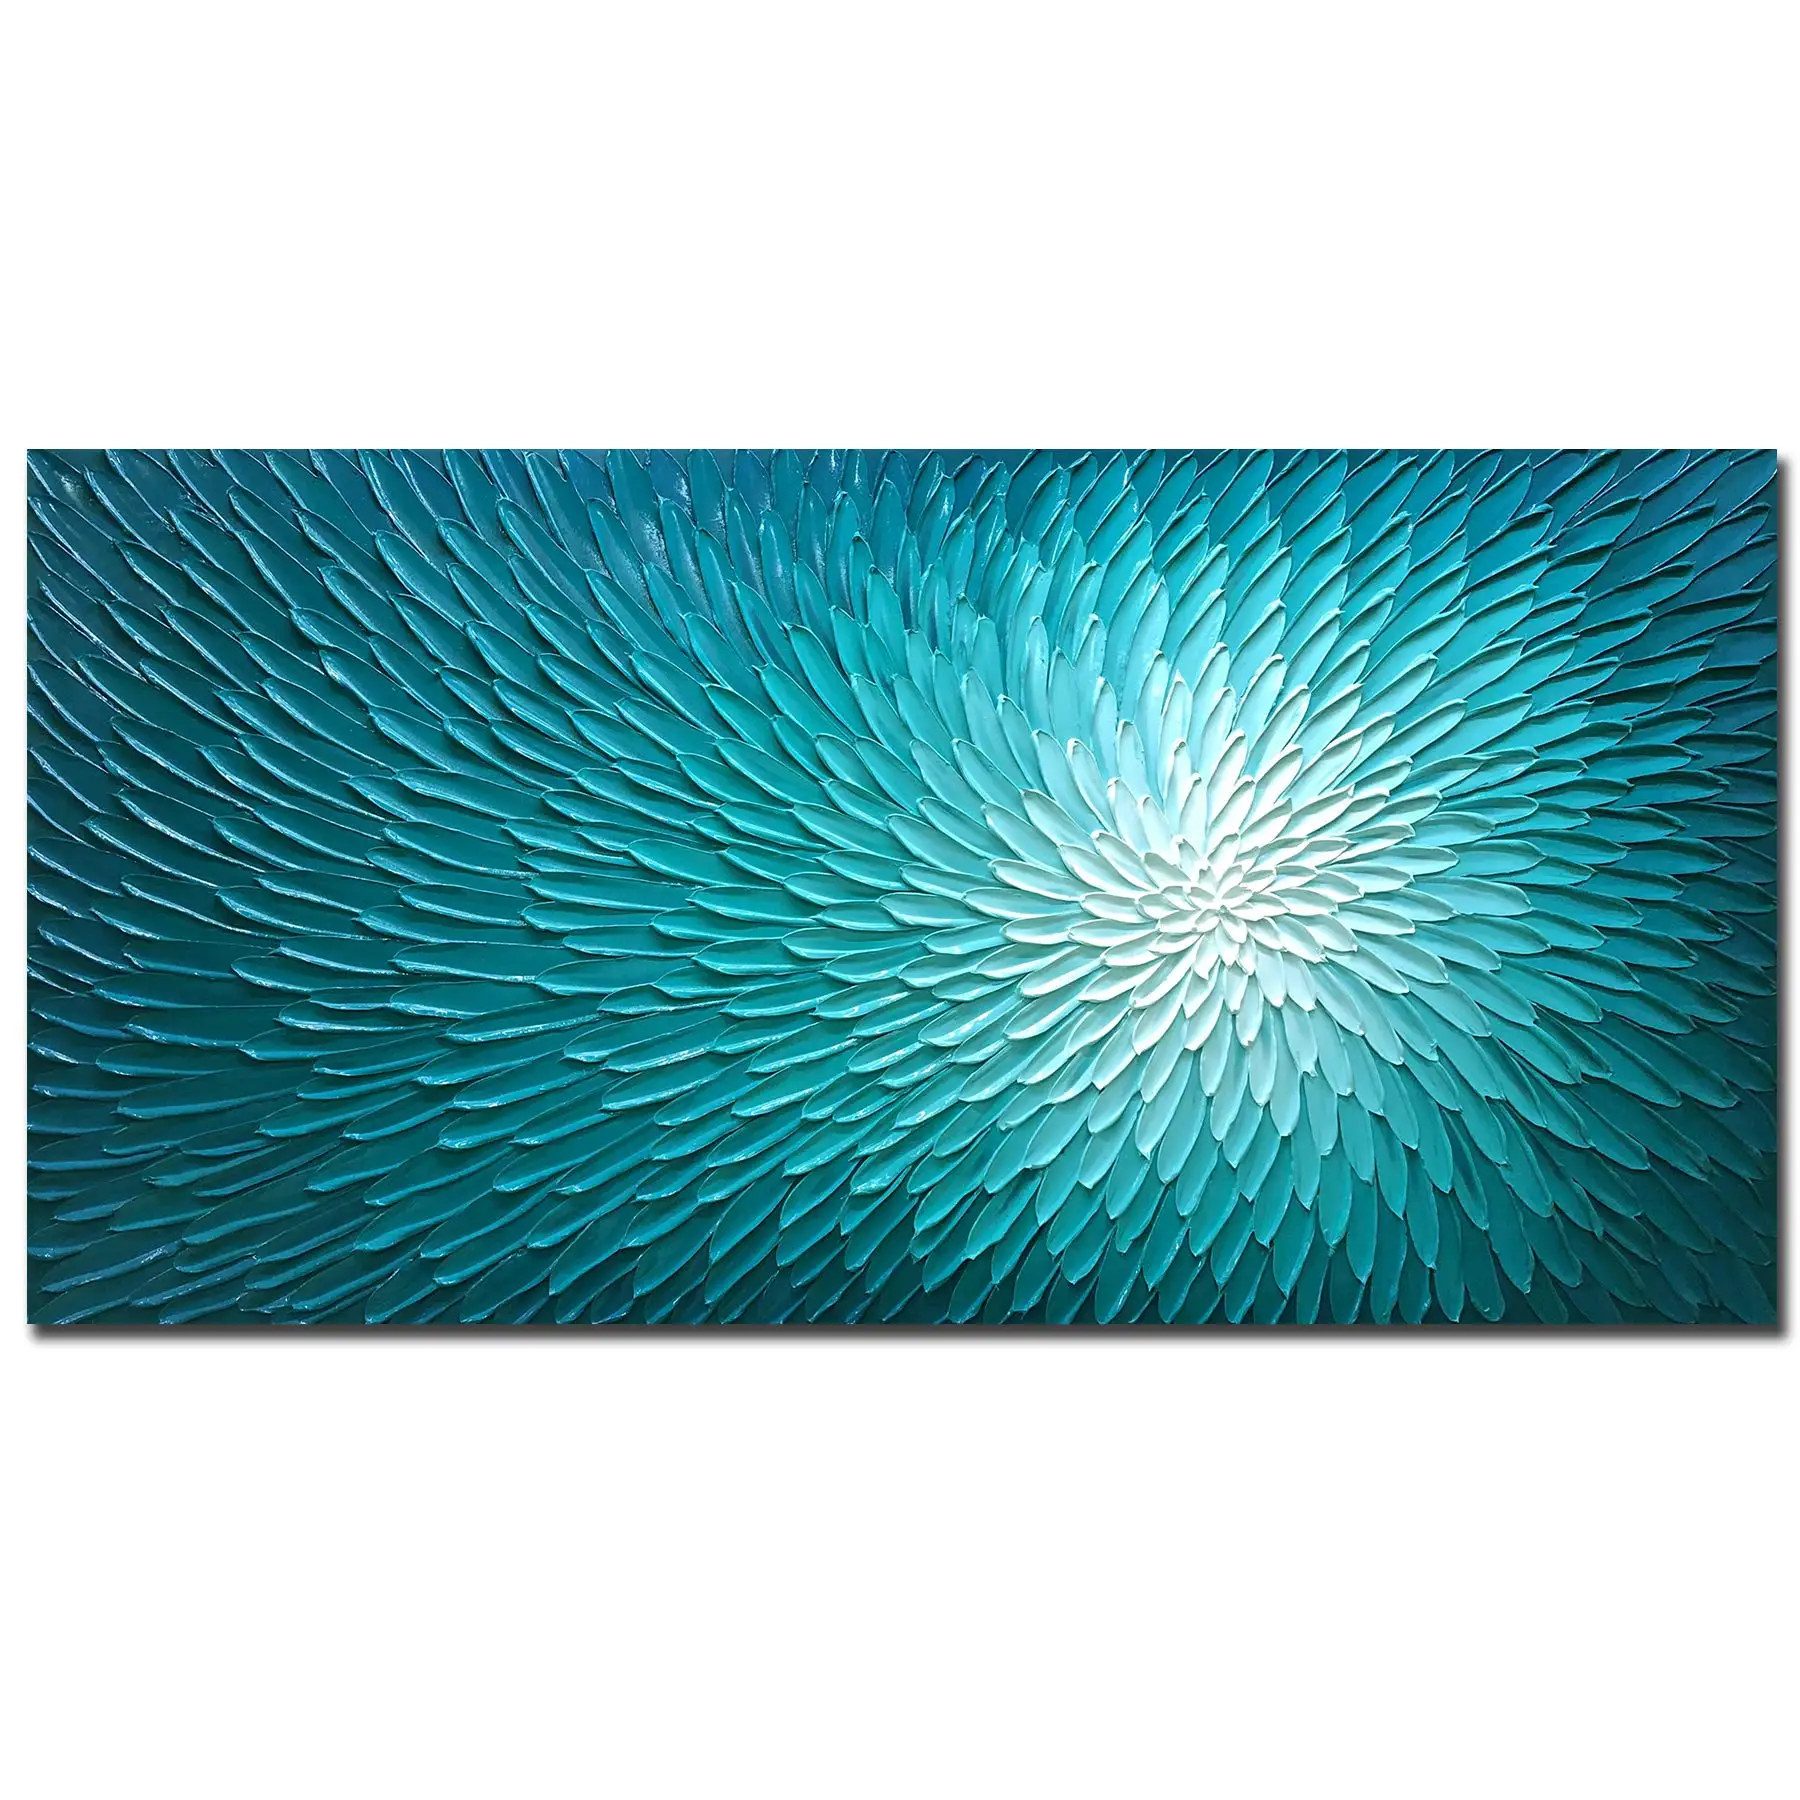 

Hand Painted Textured Wall Art on Canvas Oil Painting Teal Blue Blooming Floral Artwork Hanging Wall Decoration Abstract No Fram